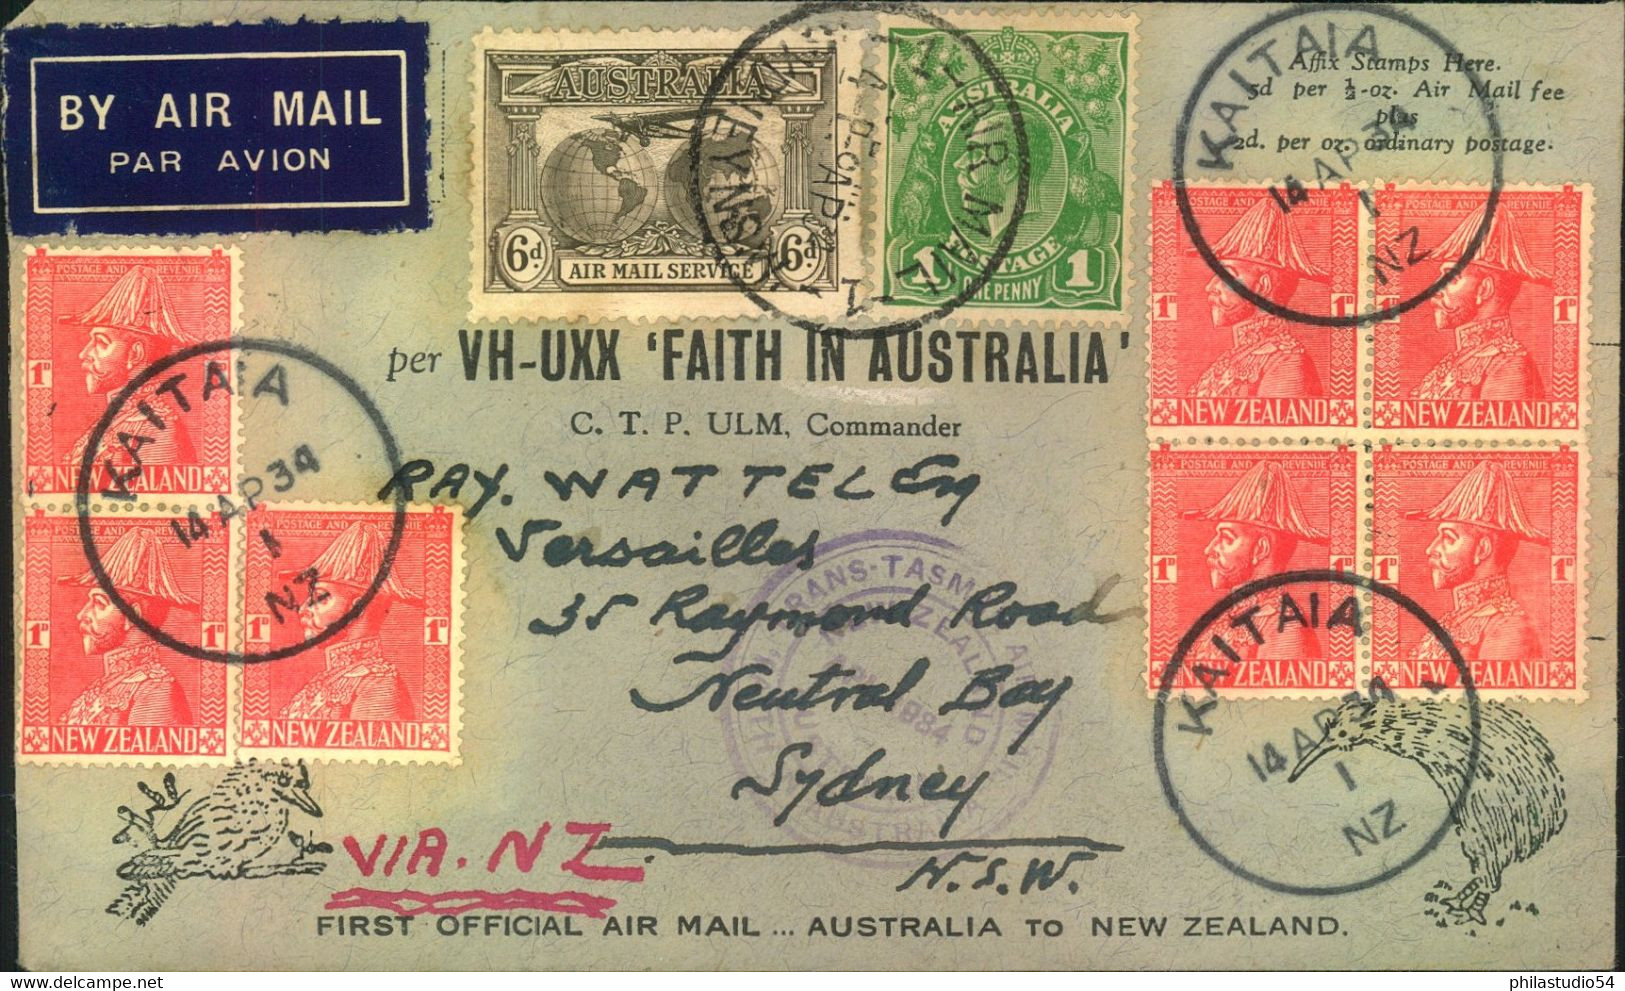 1934, Airmail Per "VH-UKK "FAITH IN AUSTRALIA" From Sydney With Arrival AUCKLAND. Back With New Zealand Franking From KA - Lettres & Documents